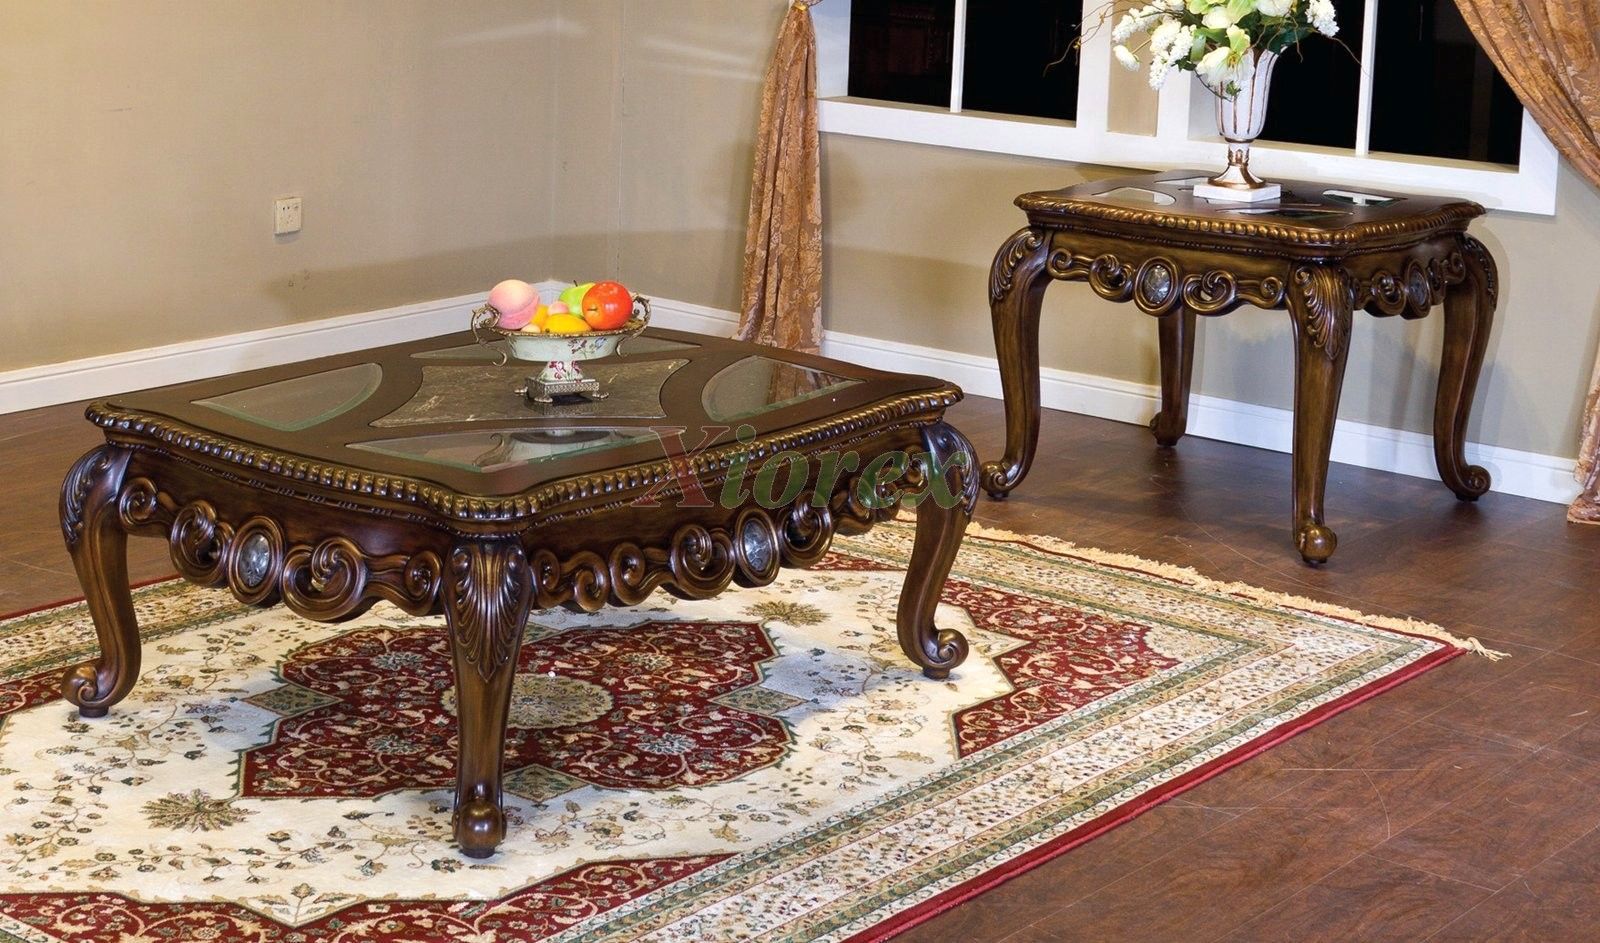 Marble Top Coffee Table Sets This Versatile Accent Table Group Includes A Rectangular Coffee Table And Two Matching End Tables That Make A Stylish (View 10 of 10)